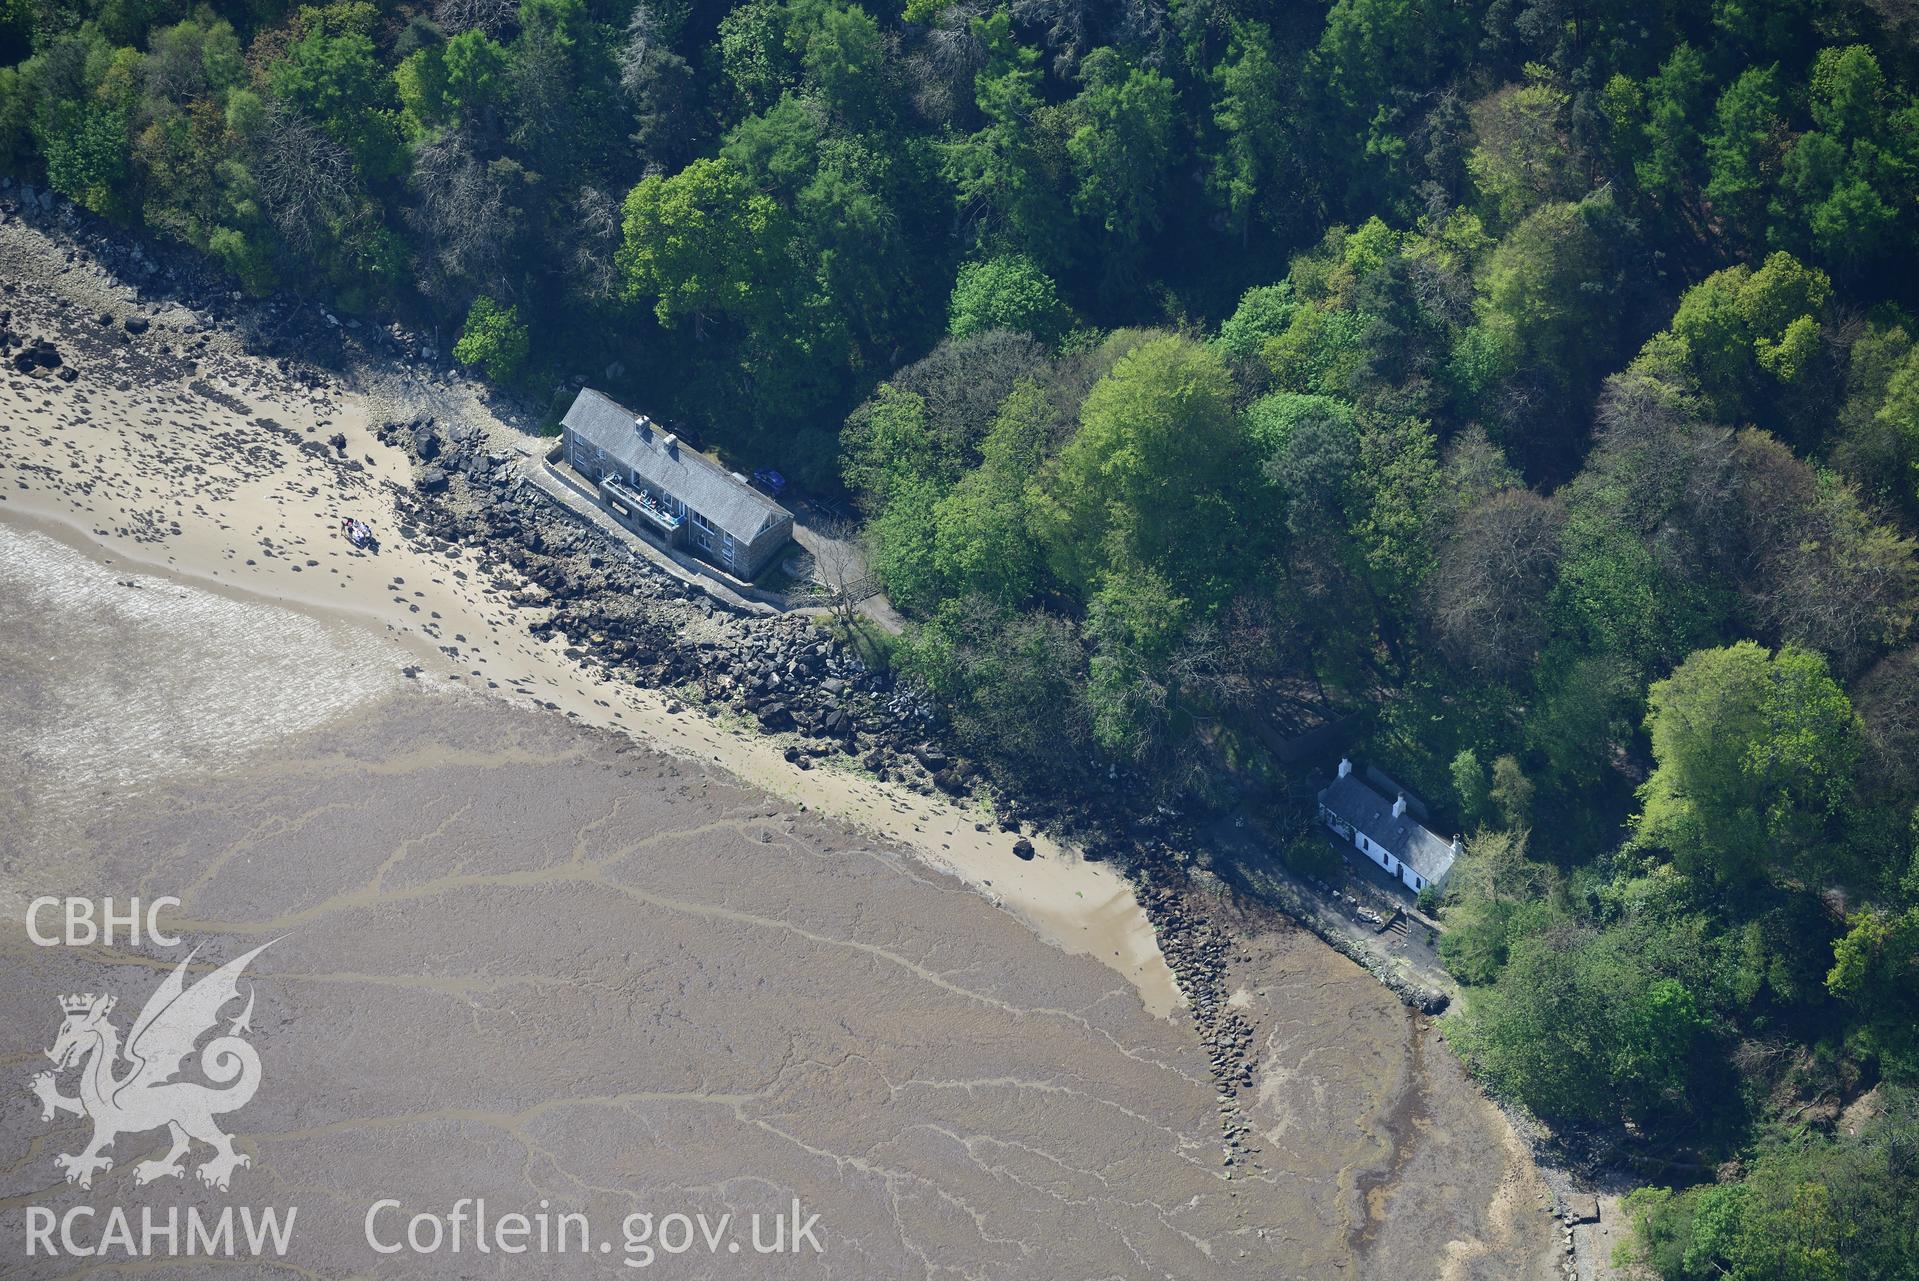 Aerial photography of cottages on Llanbedrog beach taken on 3rd May 2017.  Baseline aerial reconnaissance survey for the CHERISH Project. ? Crown: CHERISH PROJECT 2017. Produced with EU funds through the Ireland Wales Co-operation Programme 2014-2020. Al